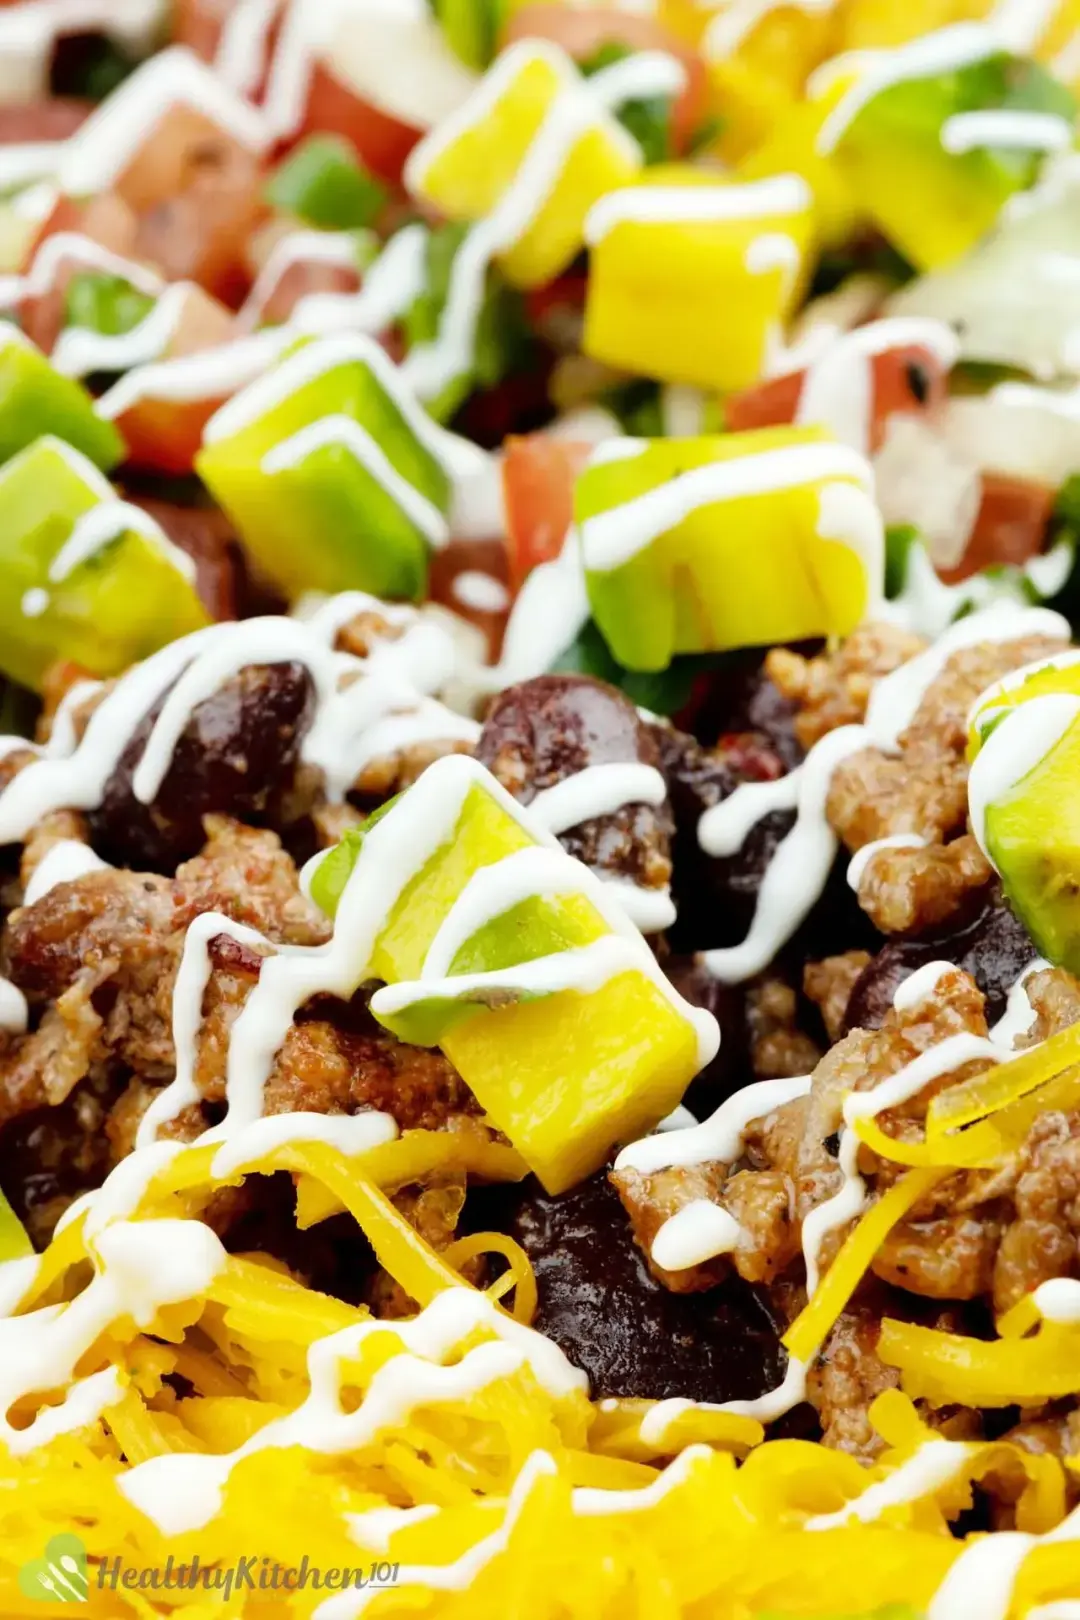 Tips for Making a Perfect Taco Salad